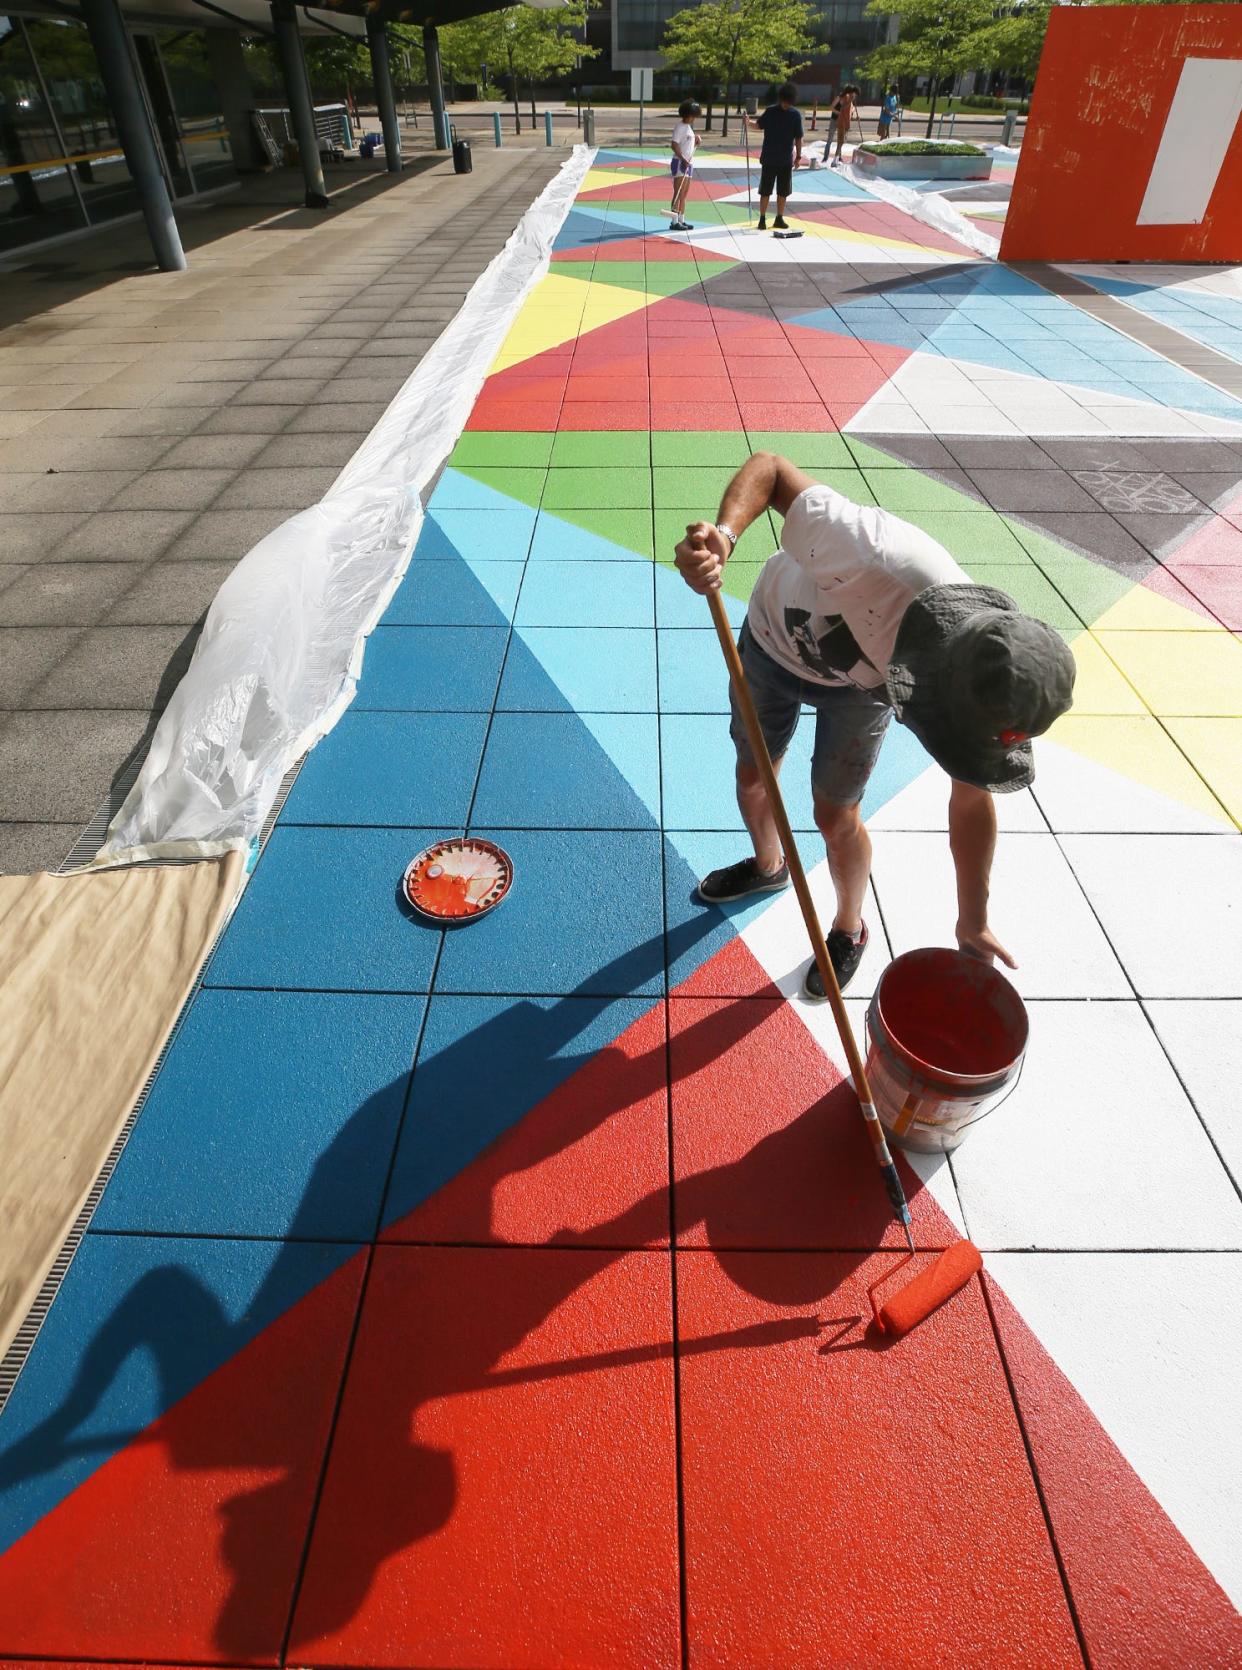 Jorge Munoz, an artist with Boa Mistura, works Monday on refreshing the paint on the STEM Plaza in Akron.